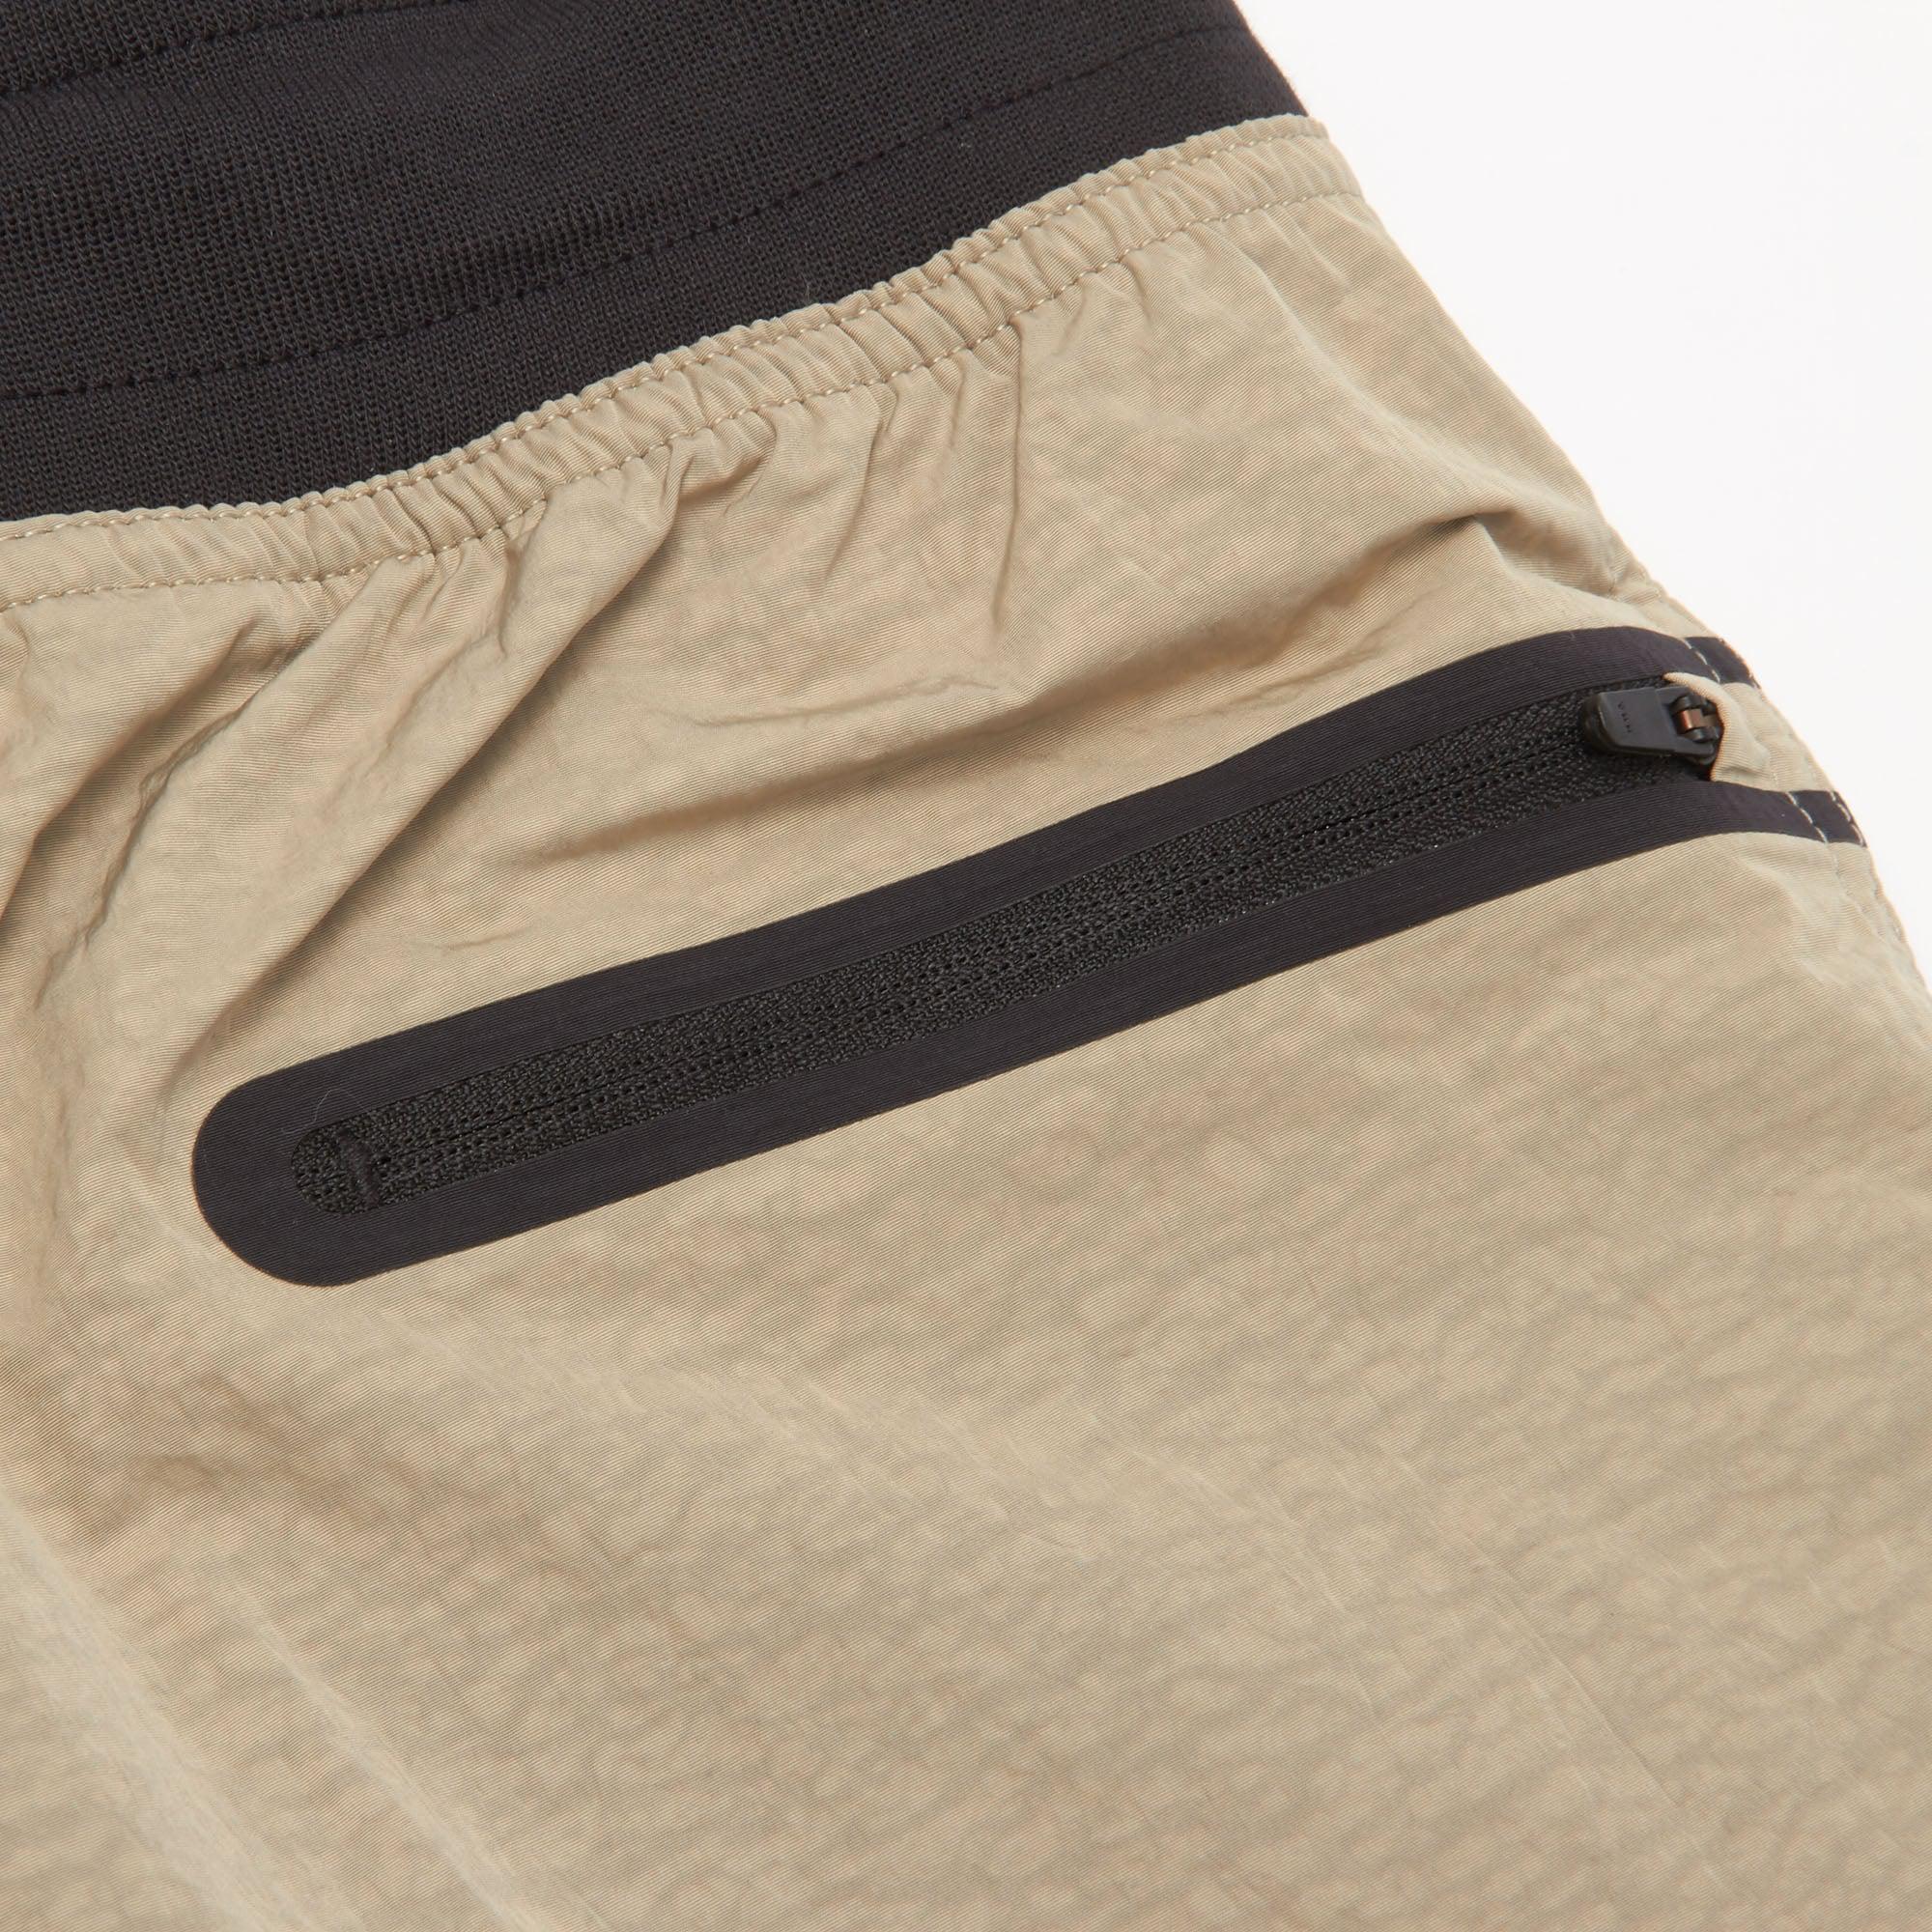 Lyst - Nike Nsw Beige Woven Shorts in Natural for Men